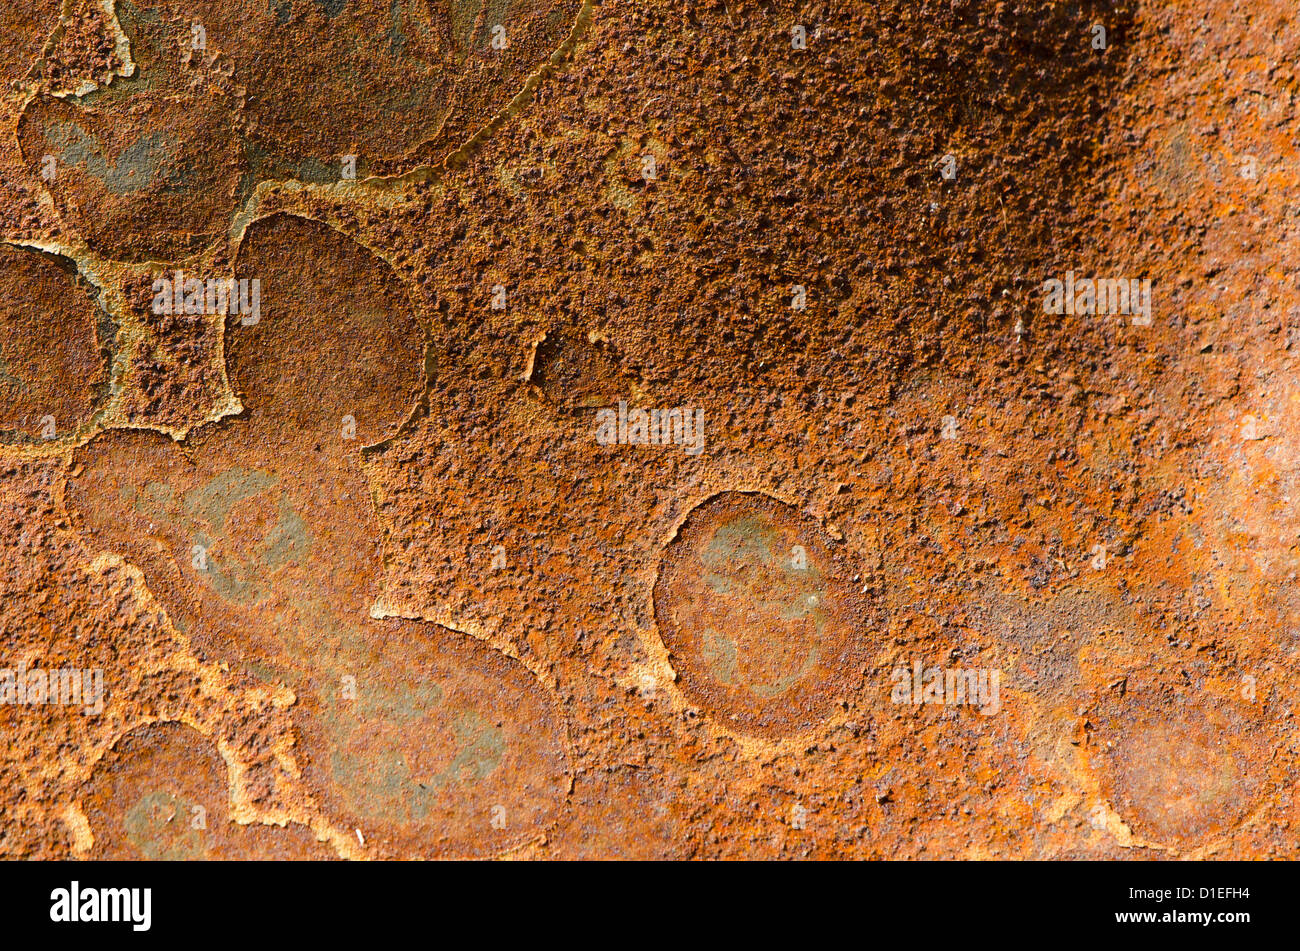 grunge rusty sheet of metal steel tin. Natural outdoor corrosion. Abstract background detail. Stock Photo